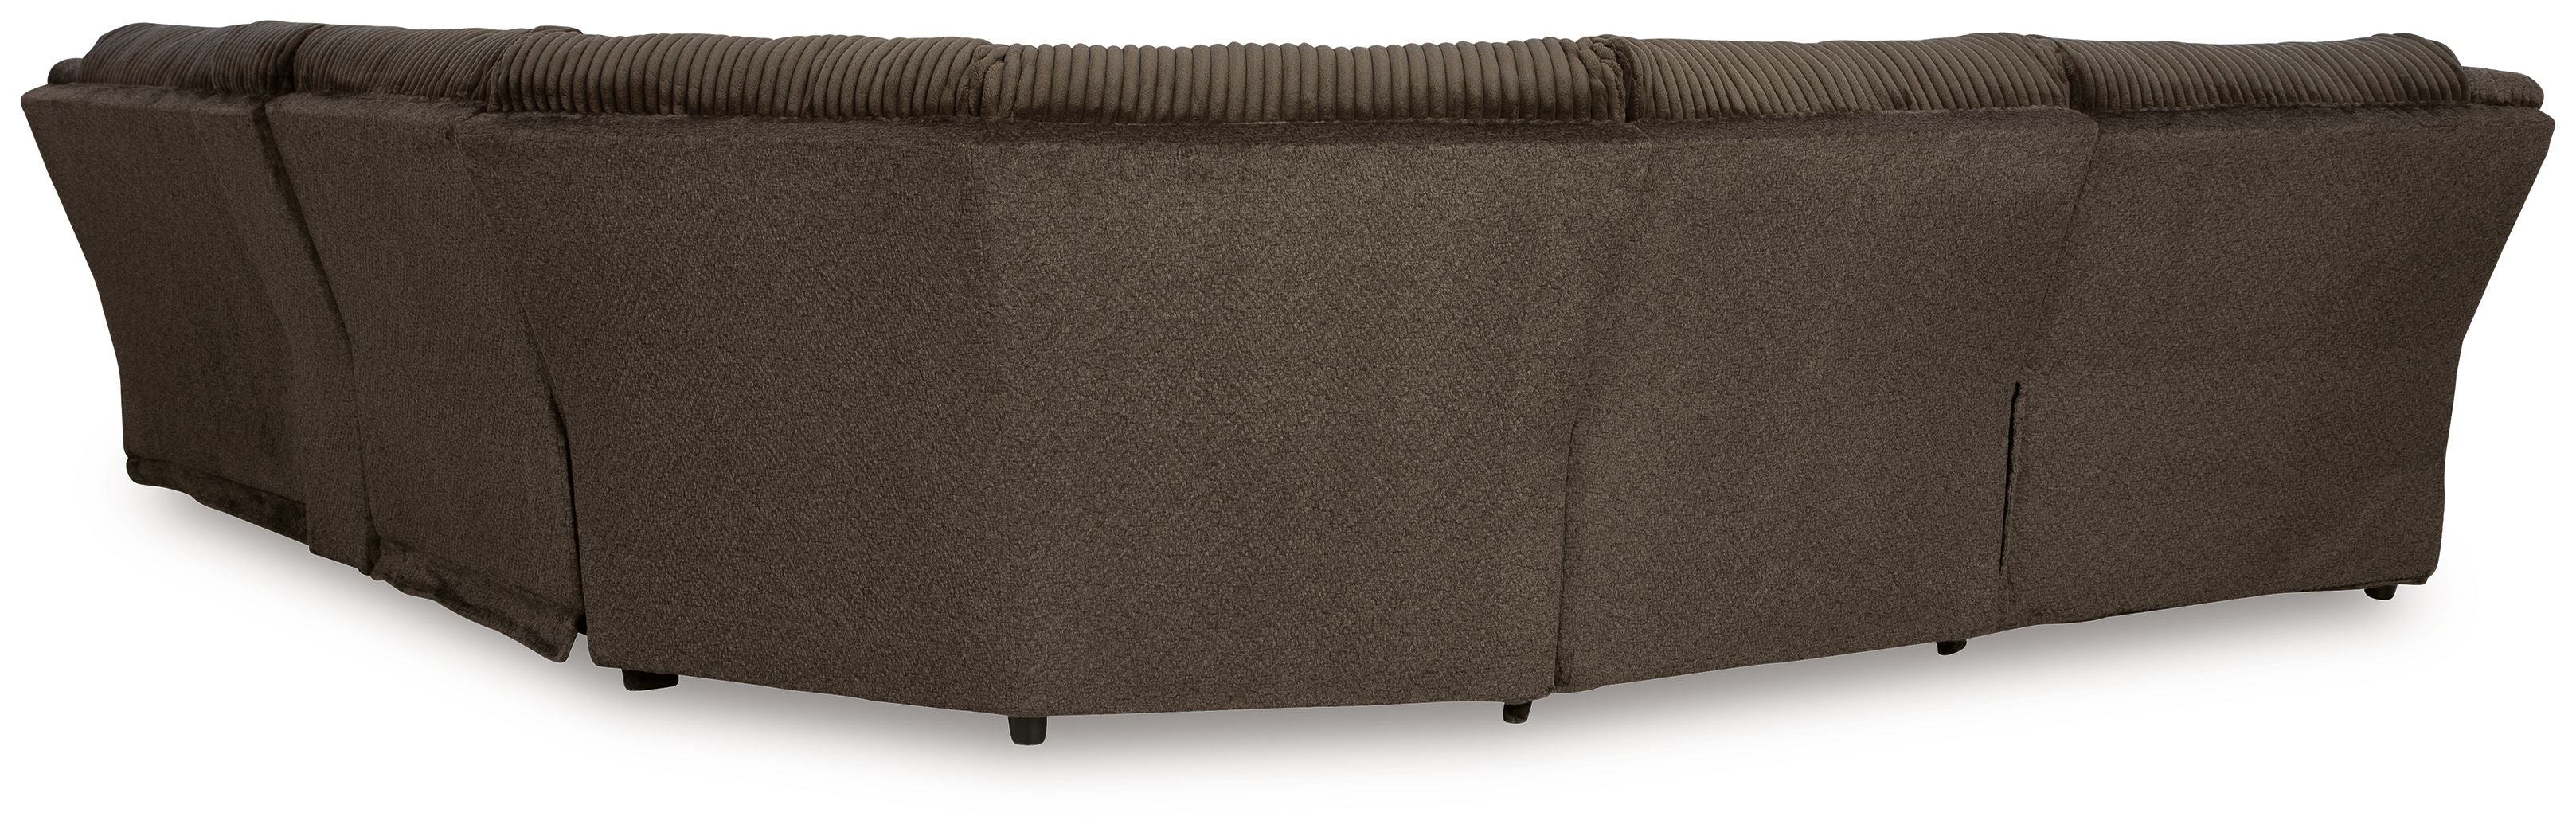 Top Tier Brown corduroy Reclining Sectional